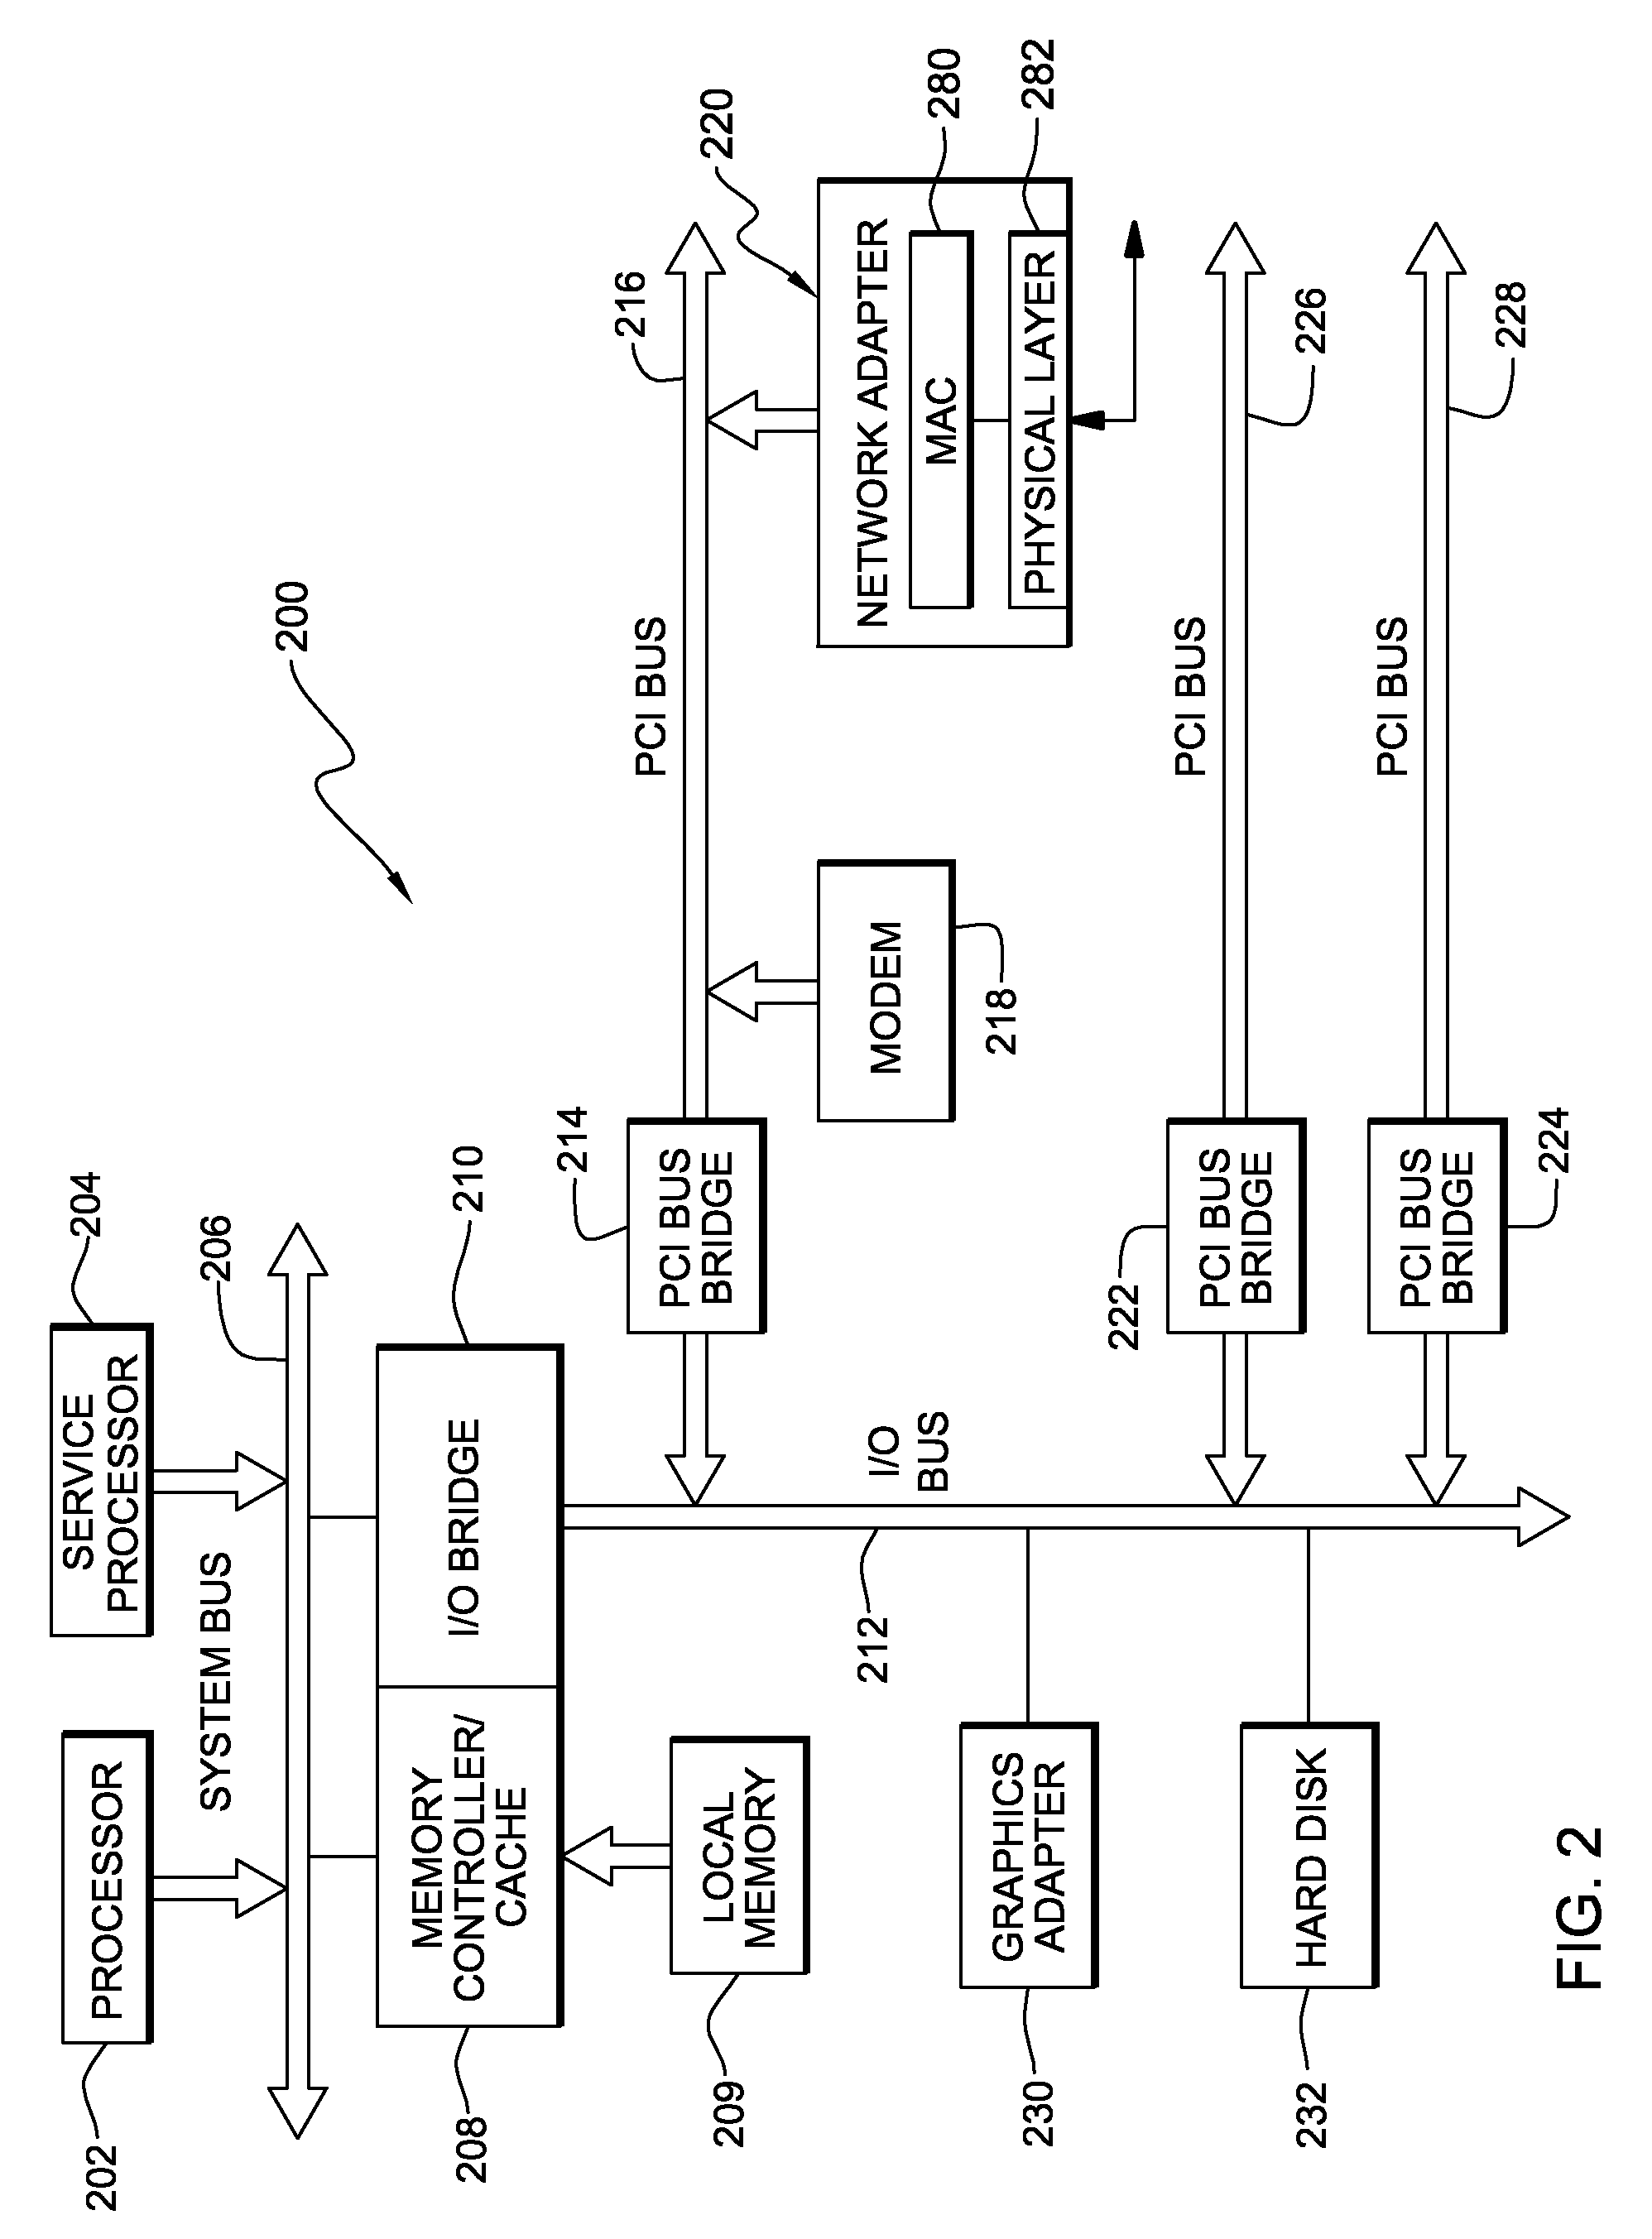 Hypervisor Page Fault Processing in a Shared Memory Partition Data Processing System